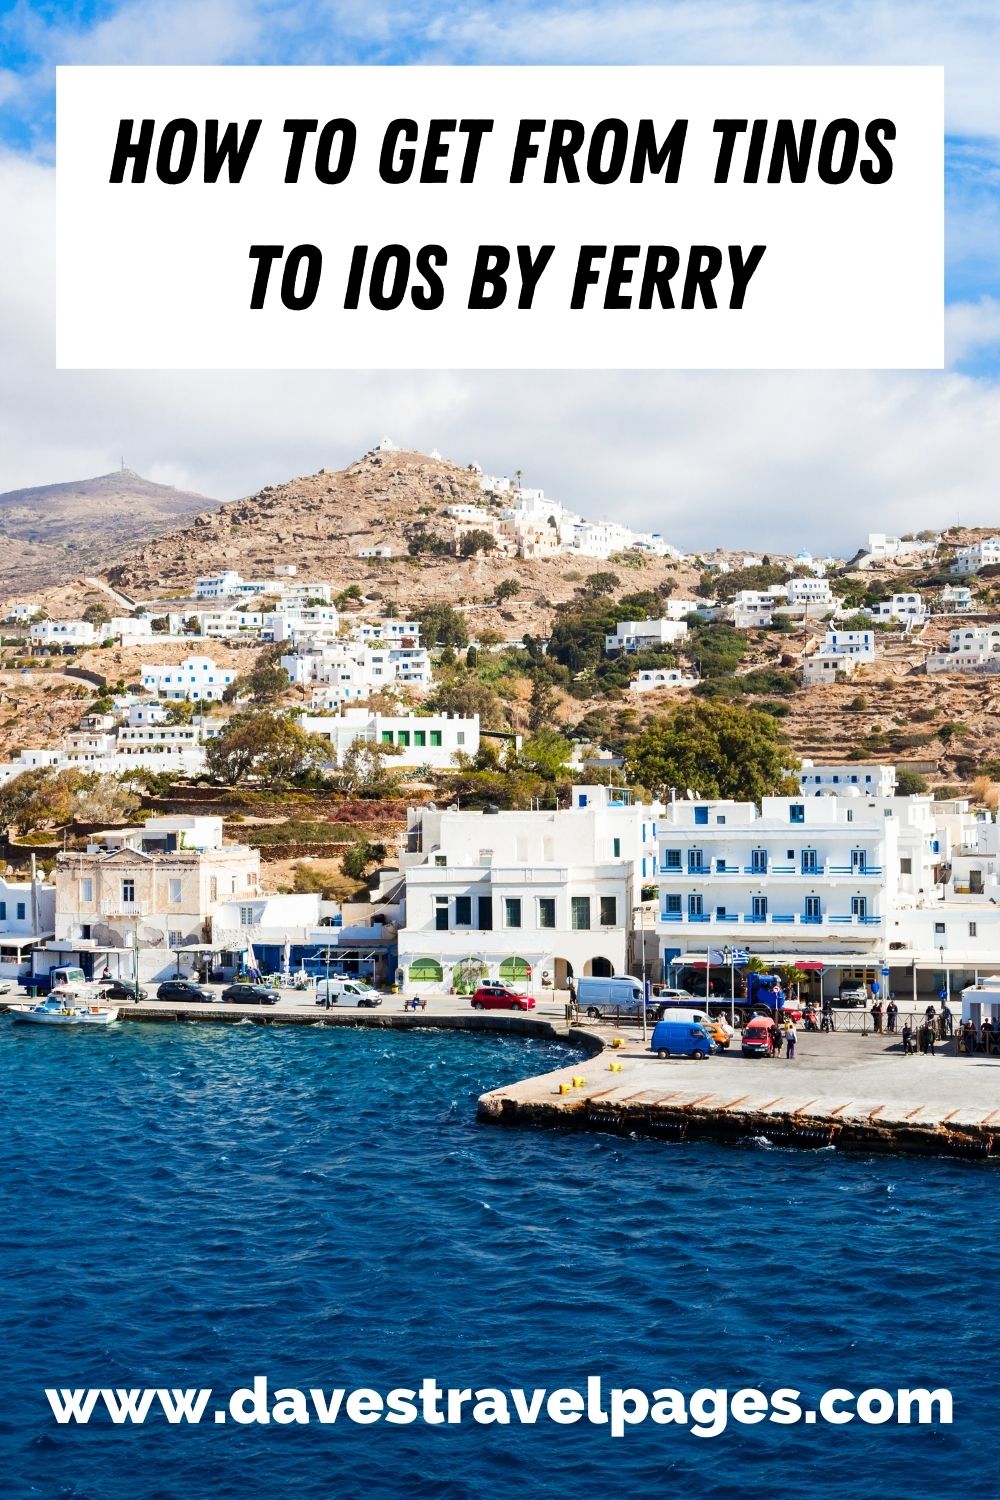 How to travel from Tinos to Ios by ferry